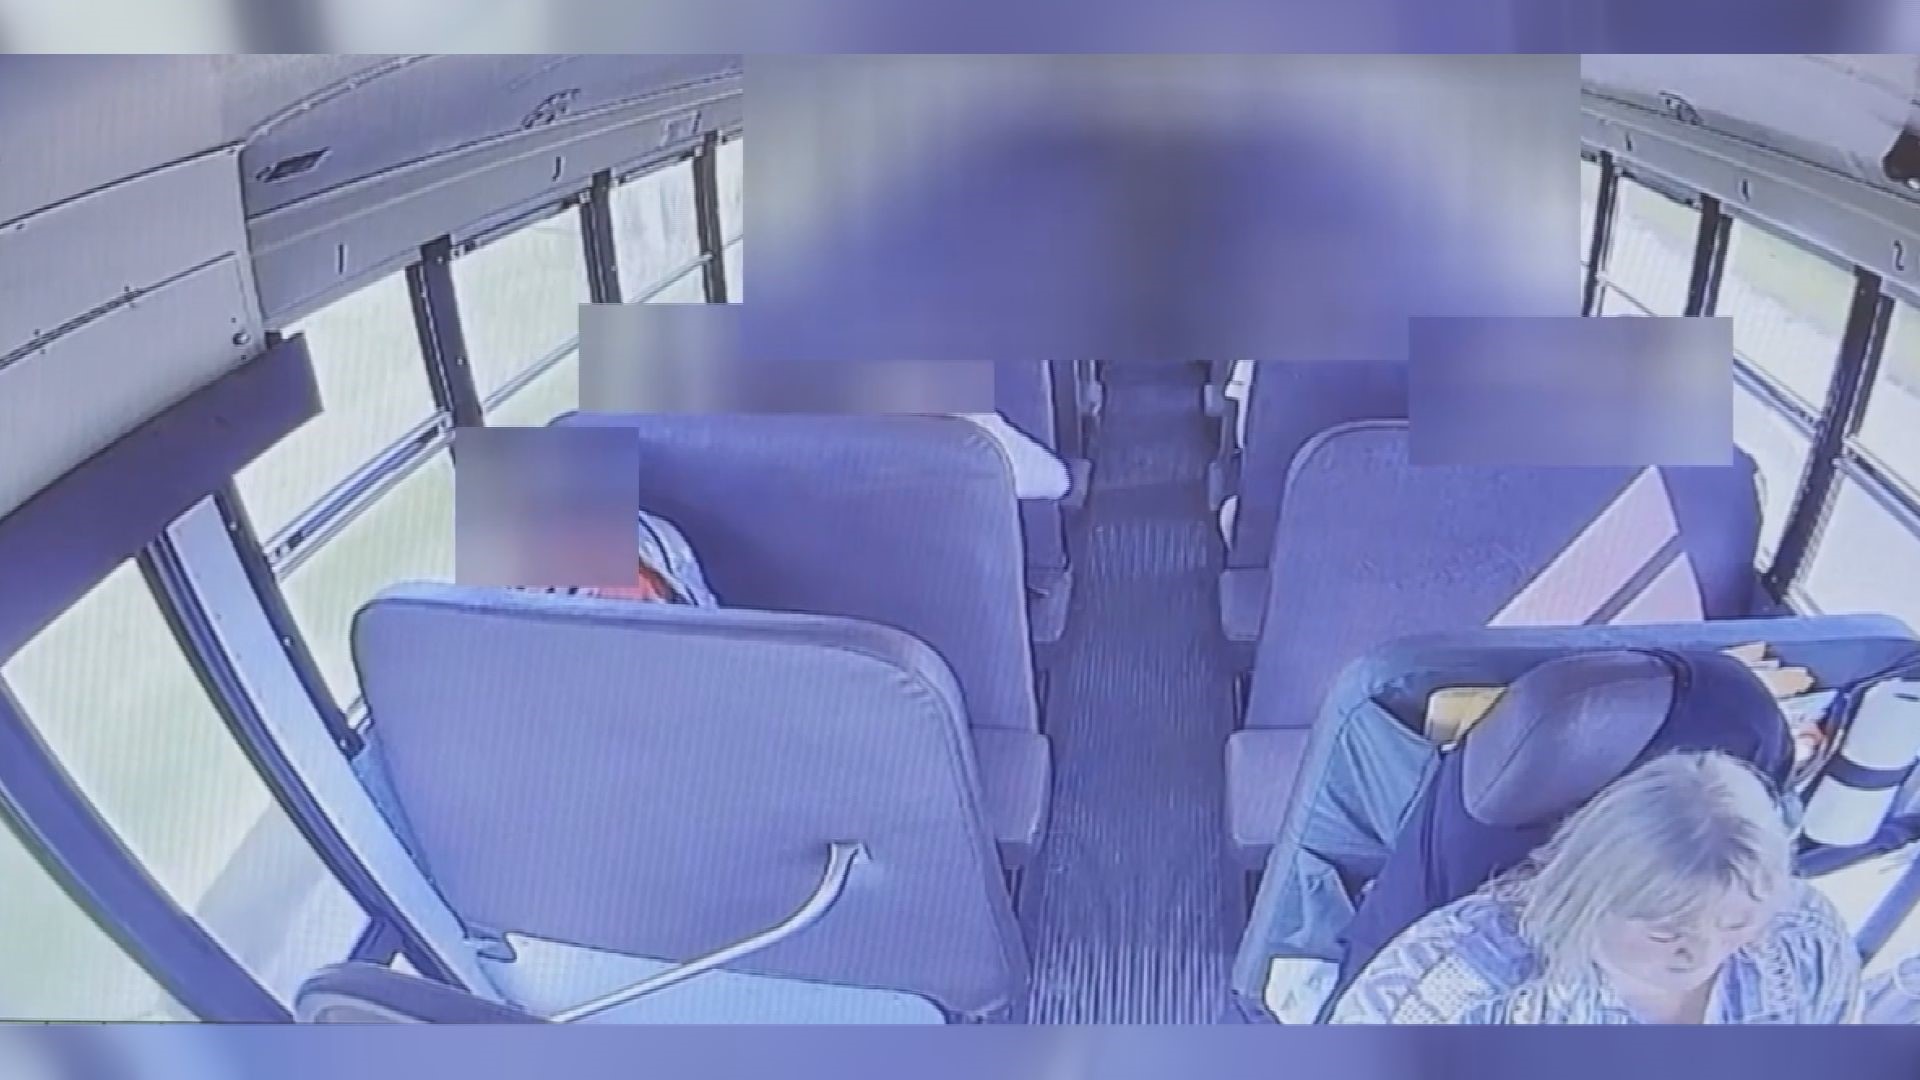 New video inside the bus has been released following the school bus crash that took place in Stark County last month.